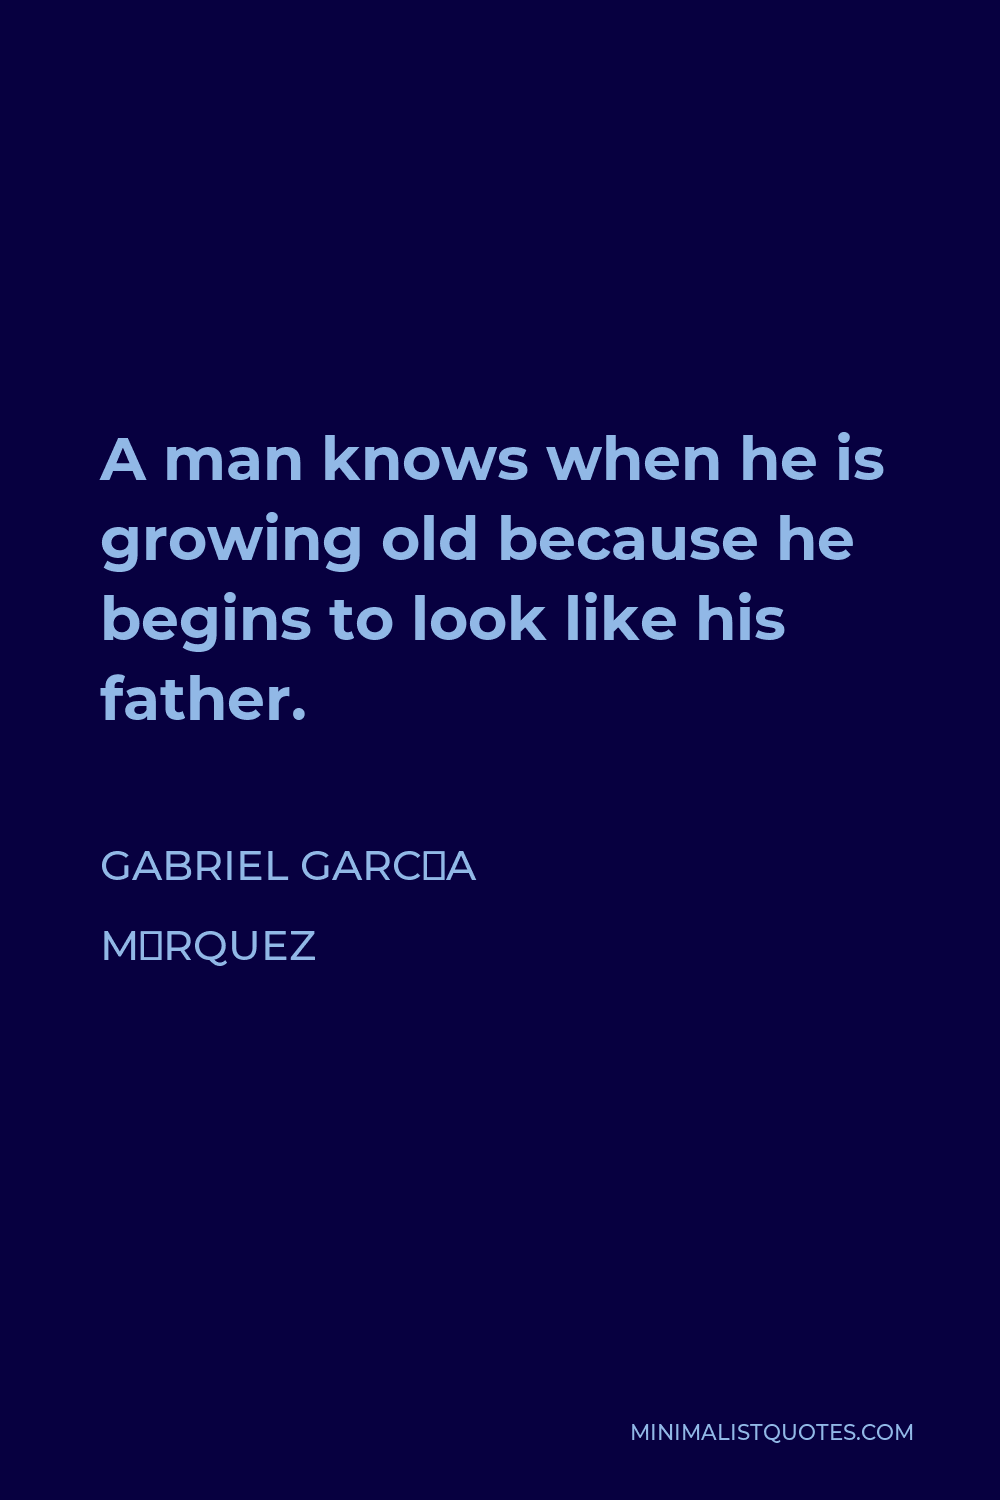 Gabriel García Márquez Quote - A man knows when he is growing old because he begins to look like his father.